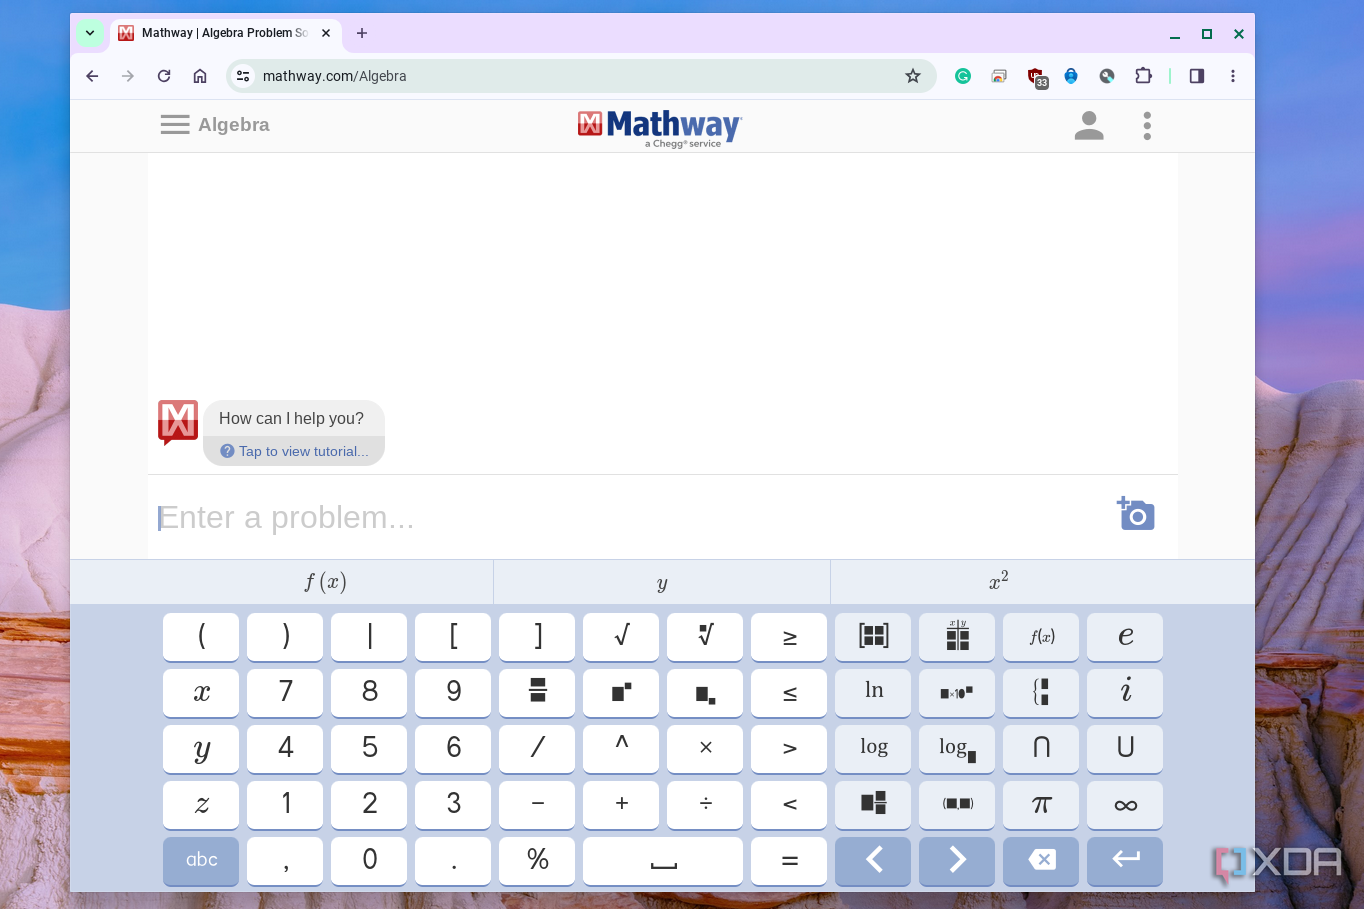 Mathway running on a Chromebook through the Chrome web browser